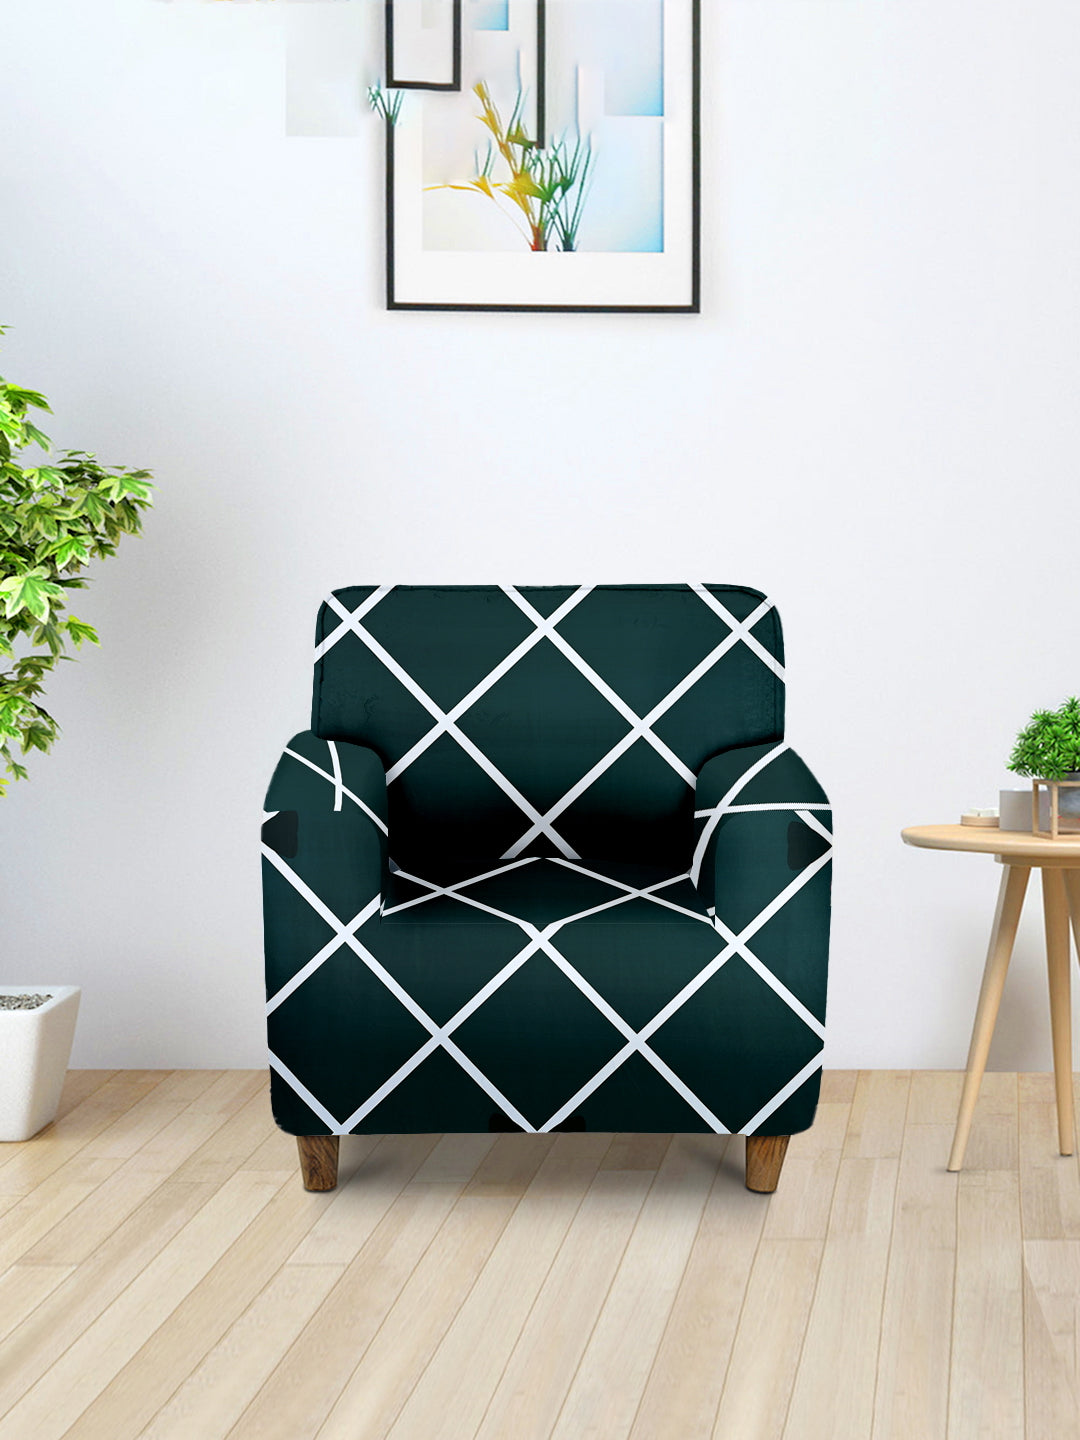 Elastic Stretchable Universal Printed Sofa Cover 1 Seater- Green